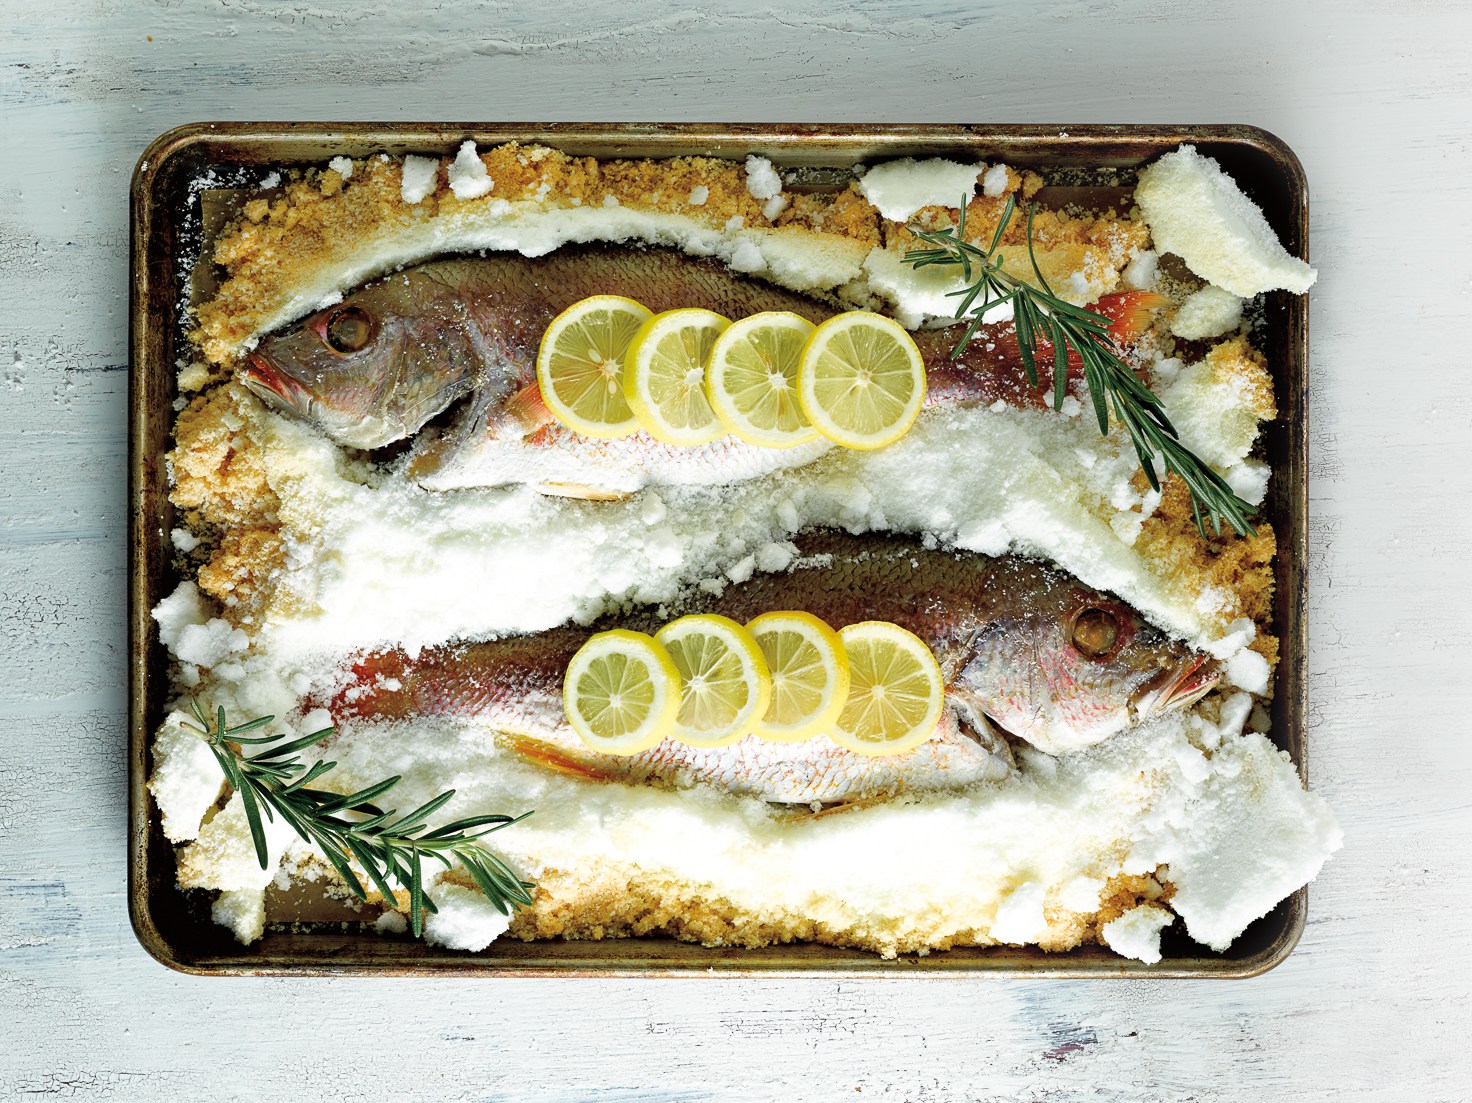 Salt crusted red snapper for a recipe in The Insatiable Lens Food and Photography Magazine.